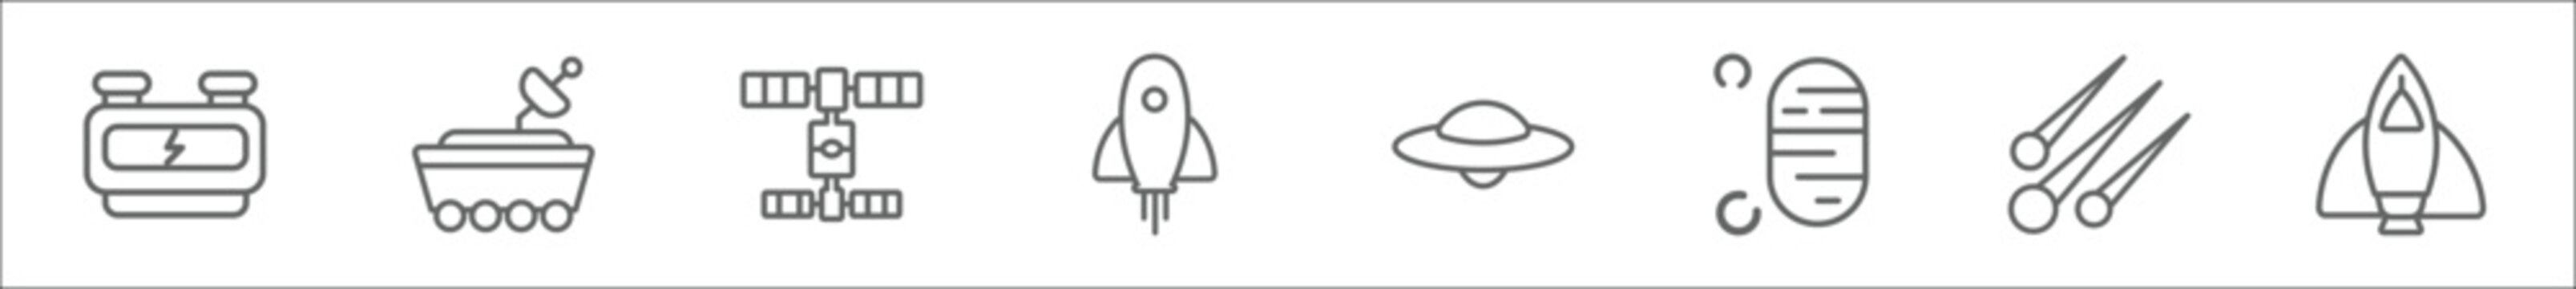 outline set of astronomy line icons. linear vector icons such as generator, moonwalker, space station, space rocket, ufo flying, foortprints on the moon, meteor shower, space ship